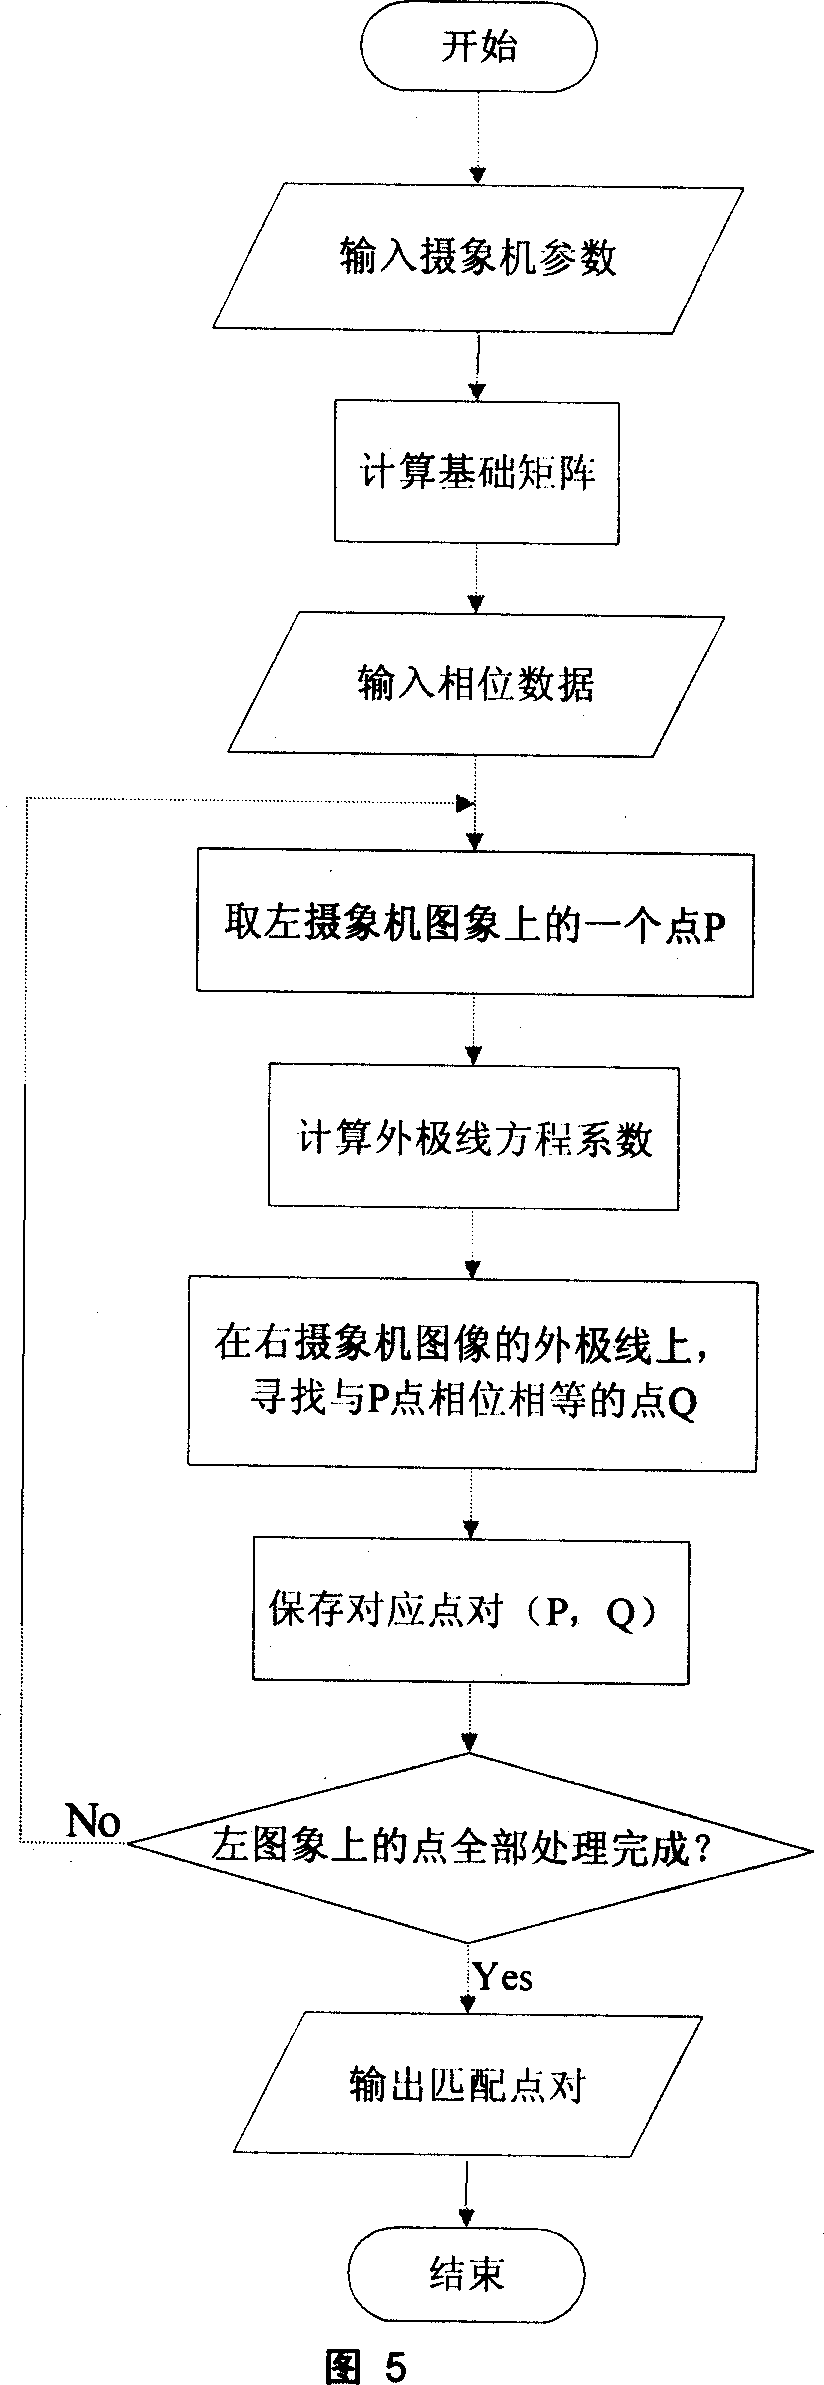 Vision measuring method for projecting multiple frequency grating object surface tri-dimensional profile